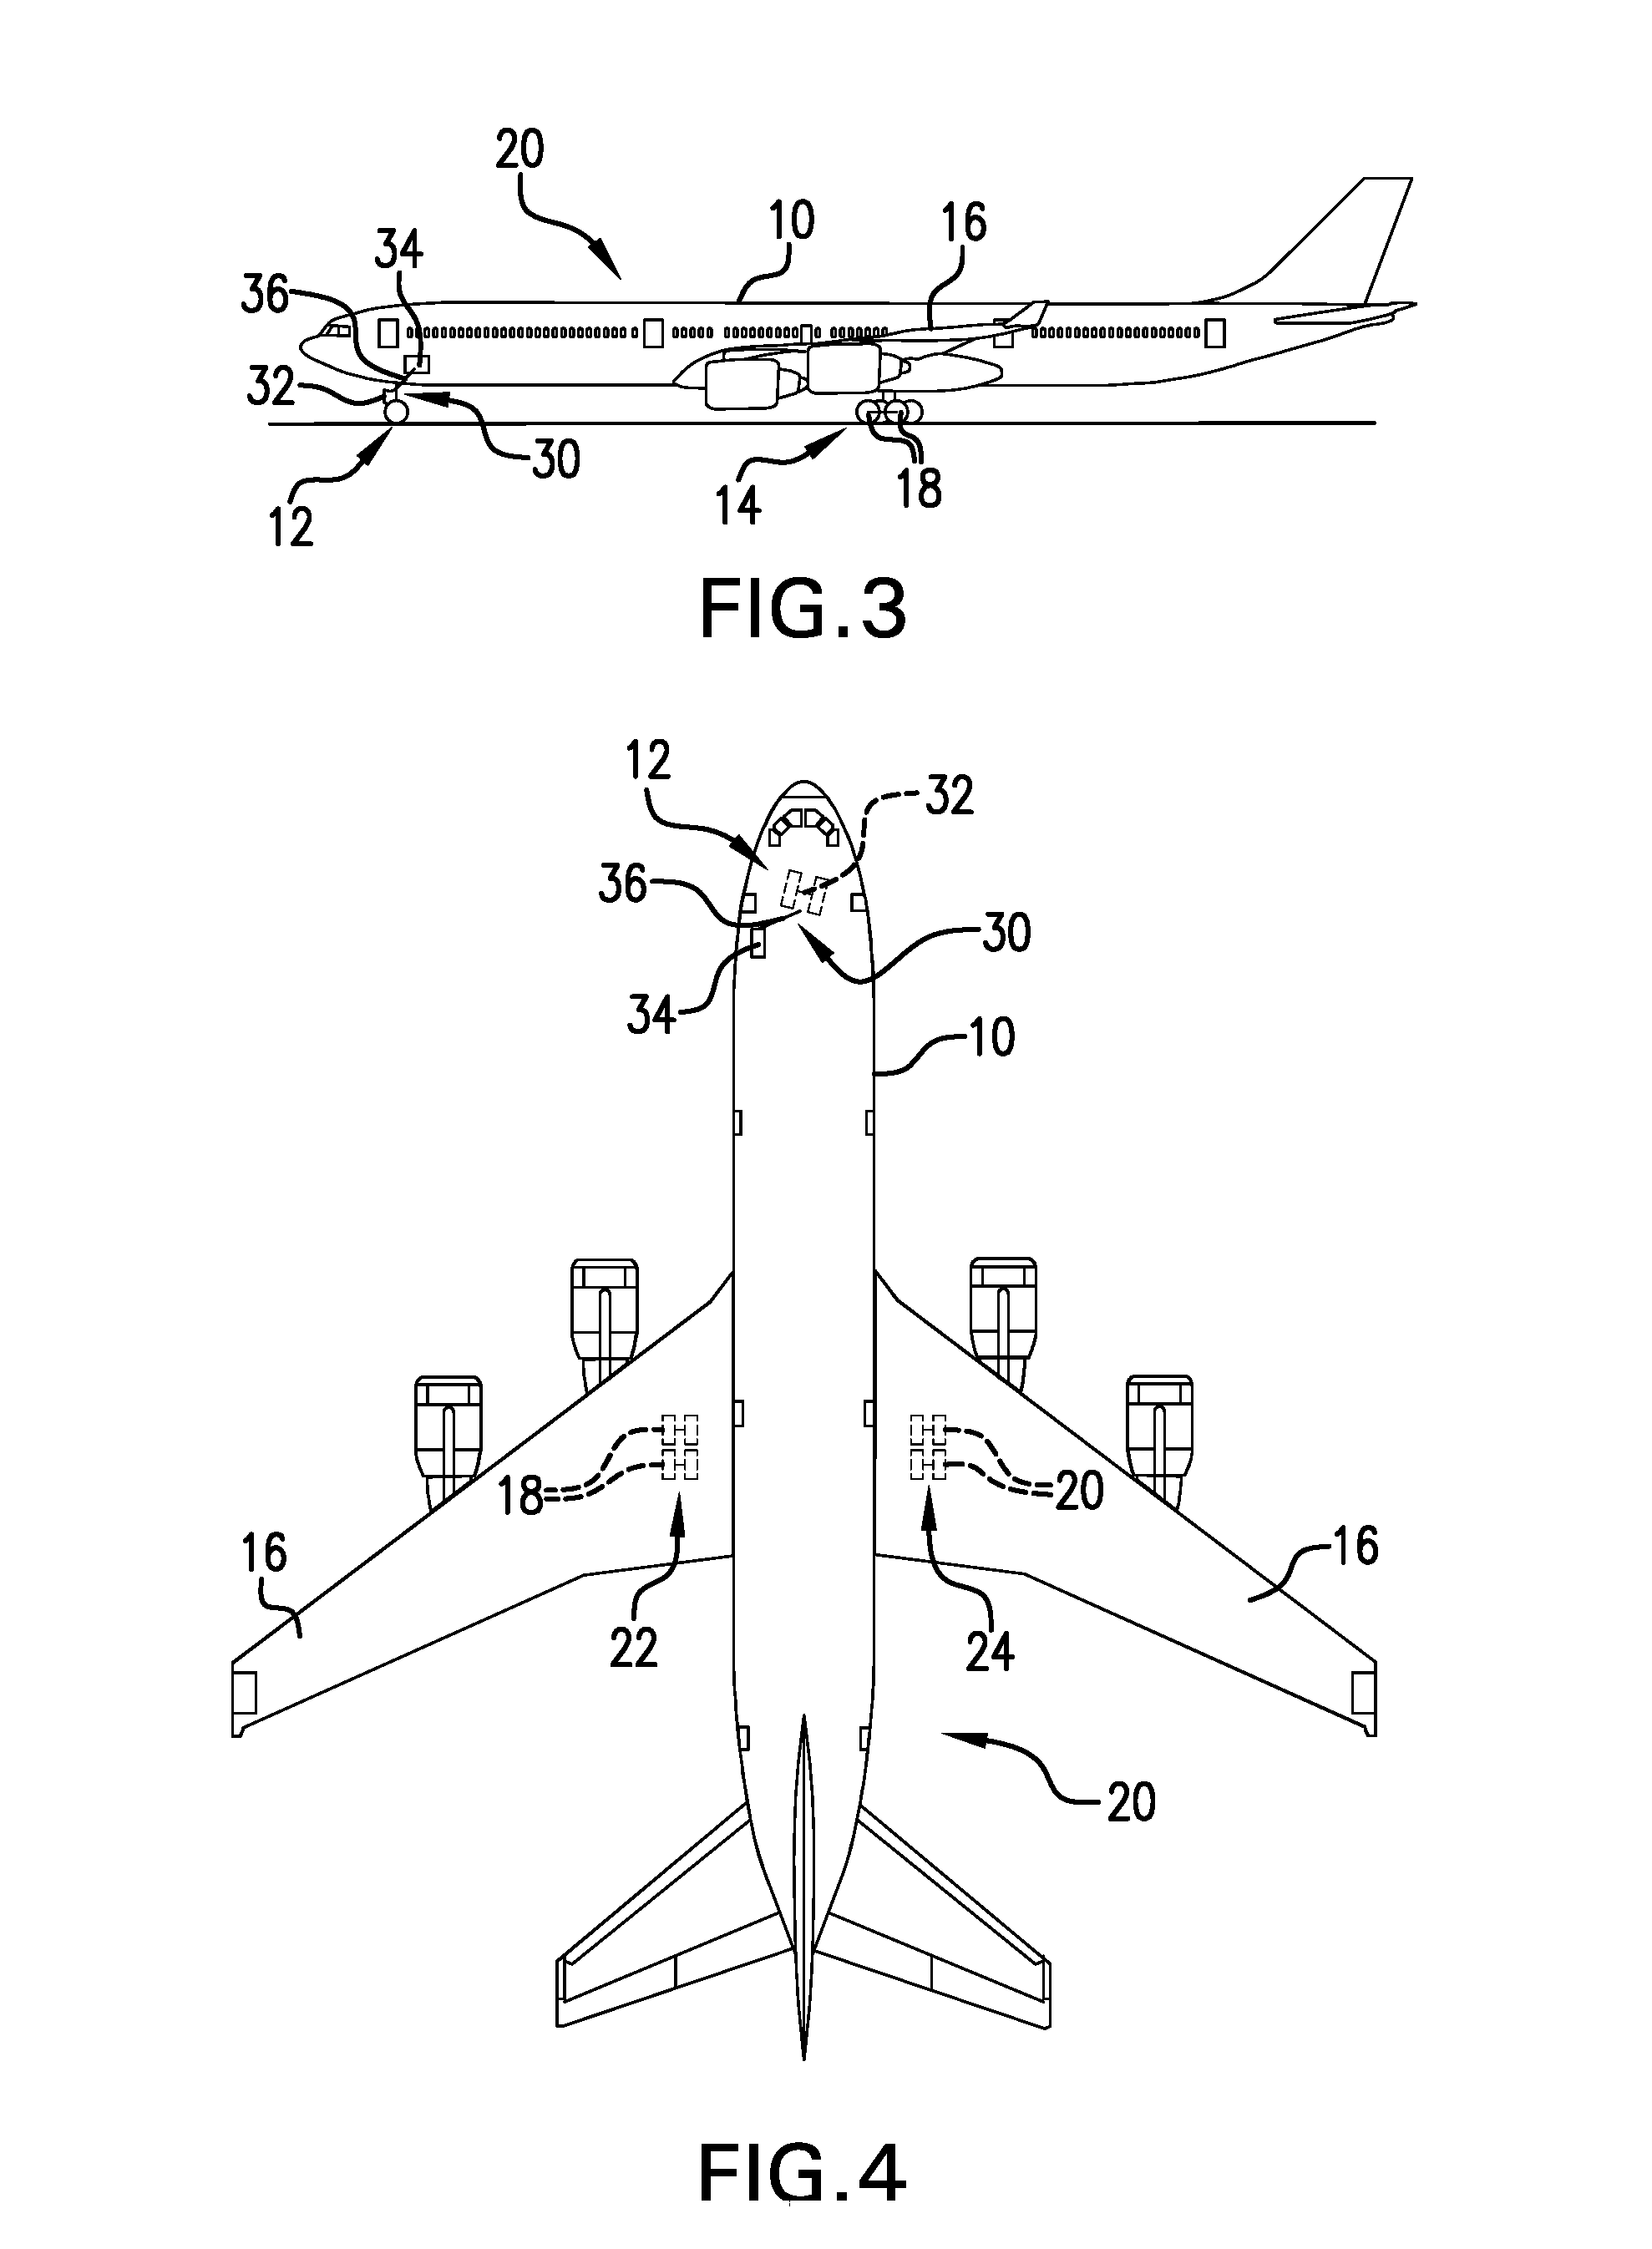 Control of ground travel and steering in an aircraft with powered main gear drive wheels